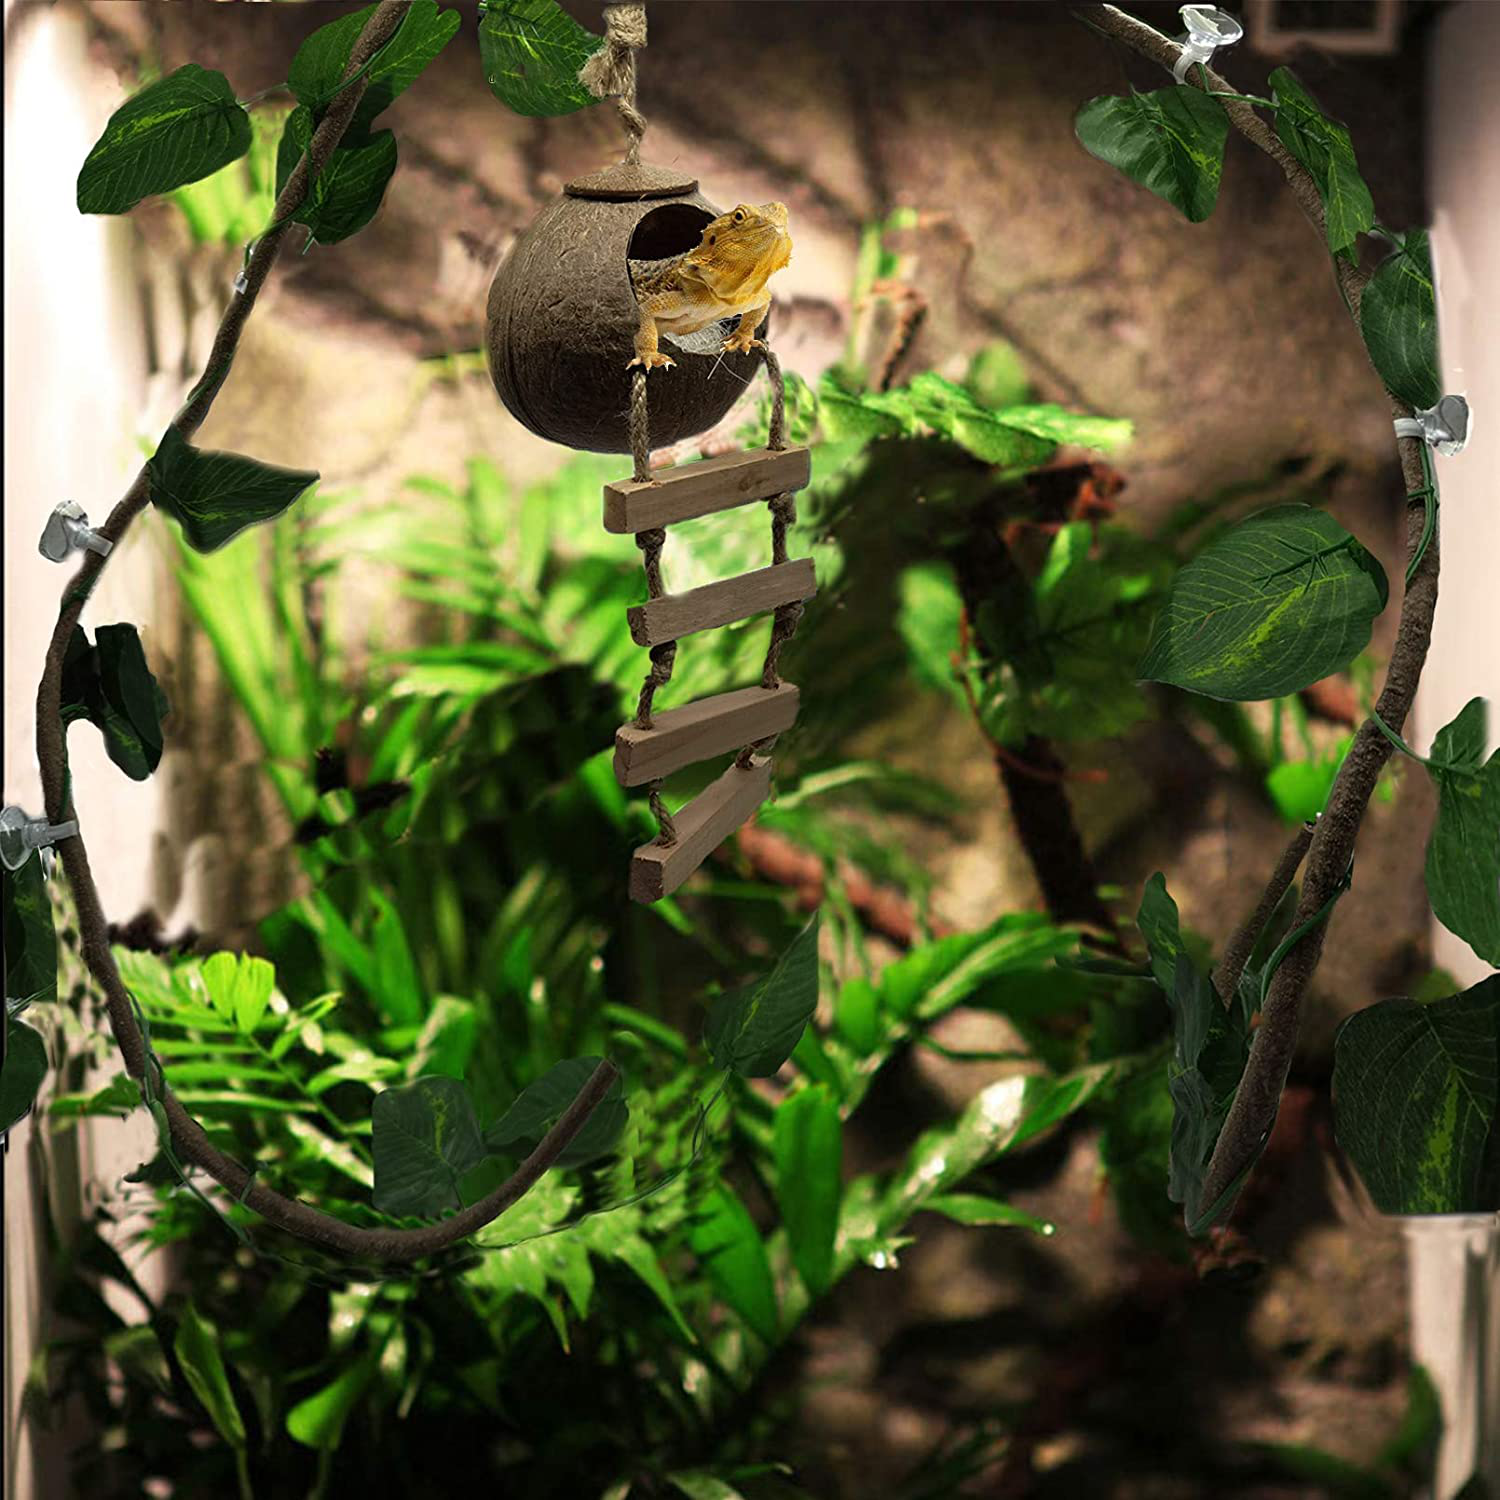 Tfwadmx Reptile Hide Coconut with Ladder,Natural Gecko Hanging Hideout Cave Hut Climbing Jungle Vine Flexible Reptile Leaves with Coconut Fiber for Turtle Beared Dragon Spider Lizard Frog Chameleon. Animals & Pet Supplies > Pet Supplies > Reptile & Amphibian Supplies > Reptile & Amphibian Habitats Tfwadmx   